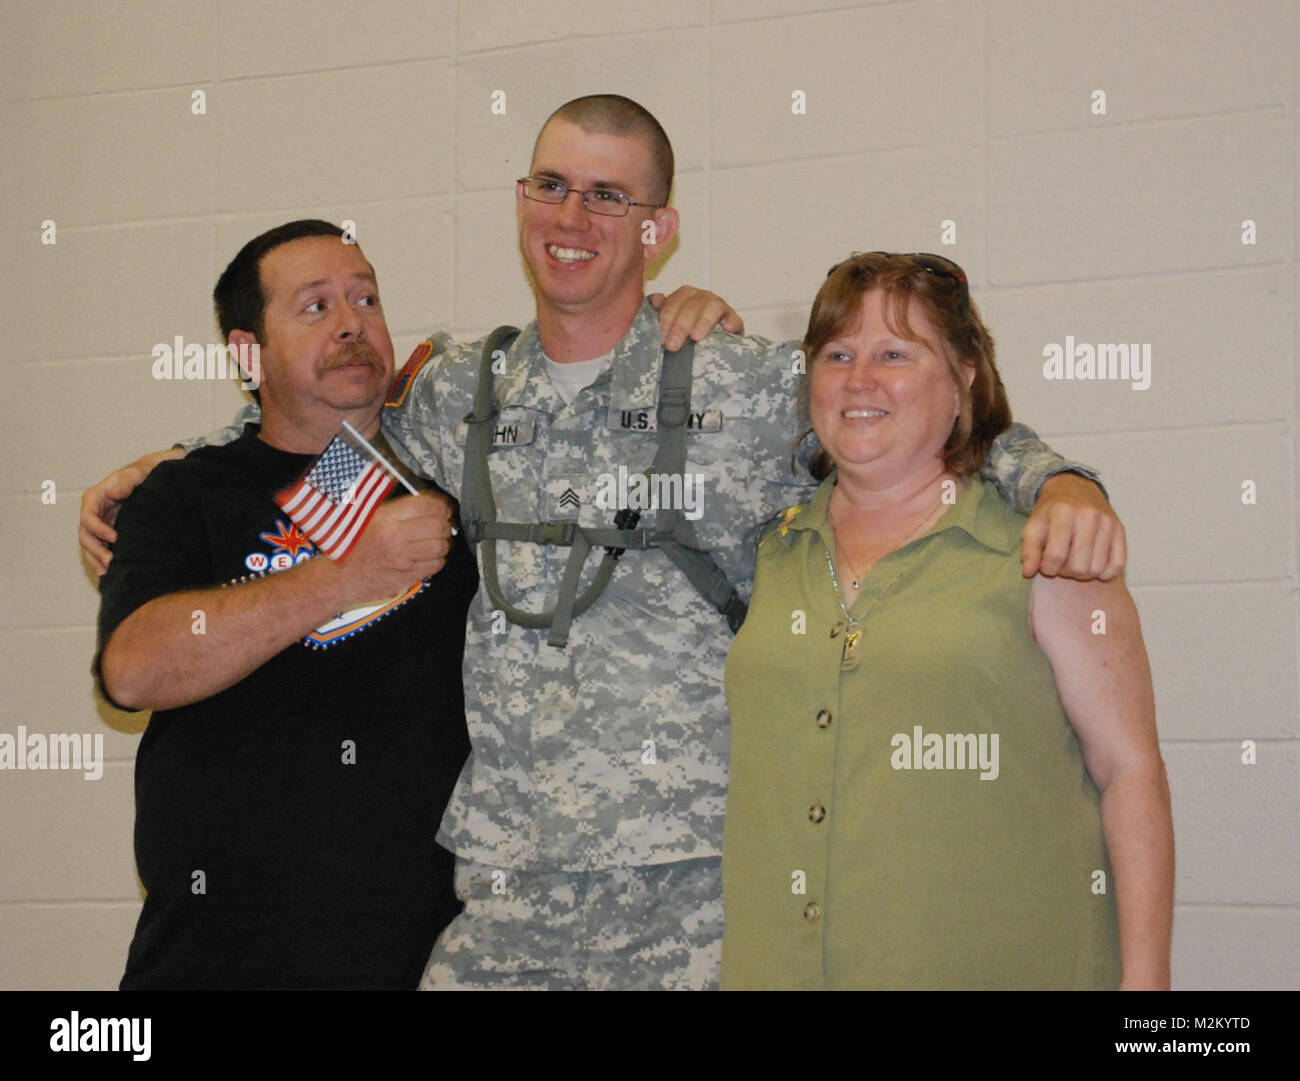 MINDEN, La. –Louisiana National Guardsman Sgt. Travis L. Hahn of the 1083rd Transportation Company, 165th Combat Sustainment Support Battalion, stands with his parents at a deployment ceremony at the Minden Civic Center in Minden, La., May 27.  The 1083rd will be deploying for a year in support of Operation Iraqi Freedom.  (U.S. Army Photo by Sgt. Beyonka D. Joseph, Louisiana National Guard State Unit Public Affairs Representative) Louisiana Guardsmen deploy in support of Operation Iraqi Freedom by Louisiana National Guard Stock Photo